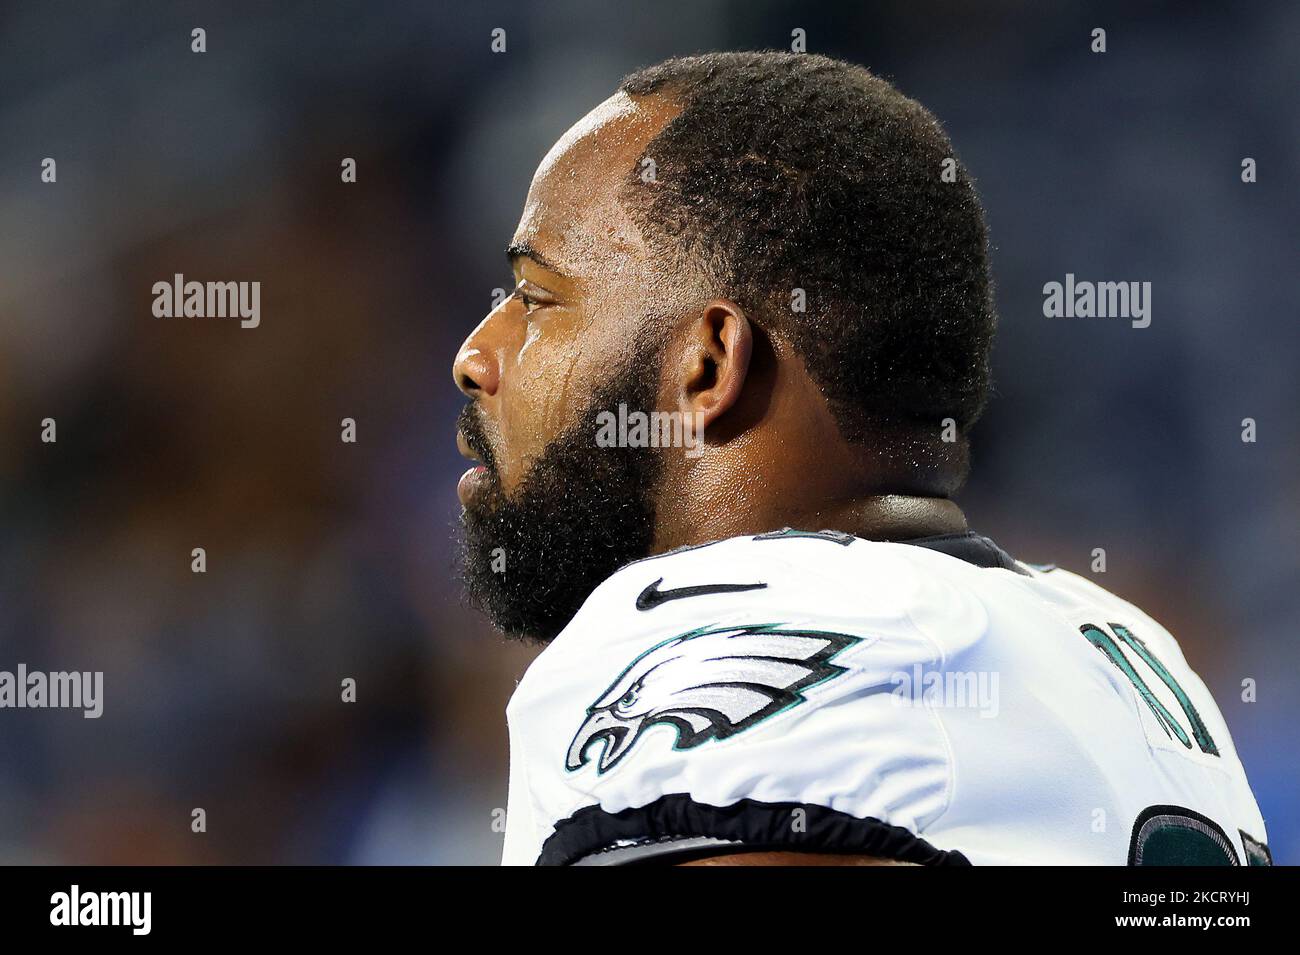 Philadelphia Eagles defensive tackle Fletcher Cox (91) stands on the field during warmups before an NFL football game between the Detroit Lions and the Philadelphia Eagles in Detroit, Michigan USA, on Sunday, October 31, 2021. (Photo by Amy Lemus/NurPhoto) Stock Photo